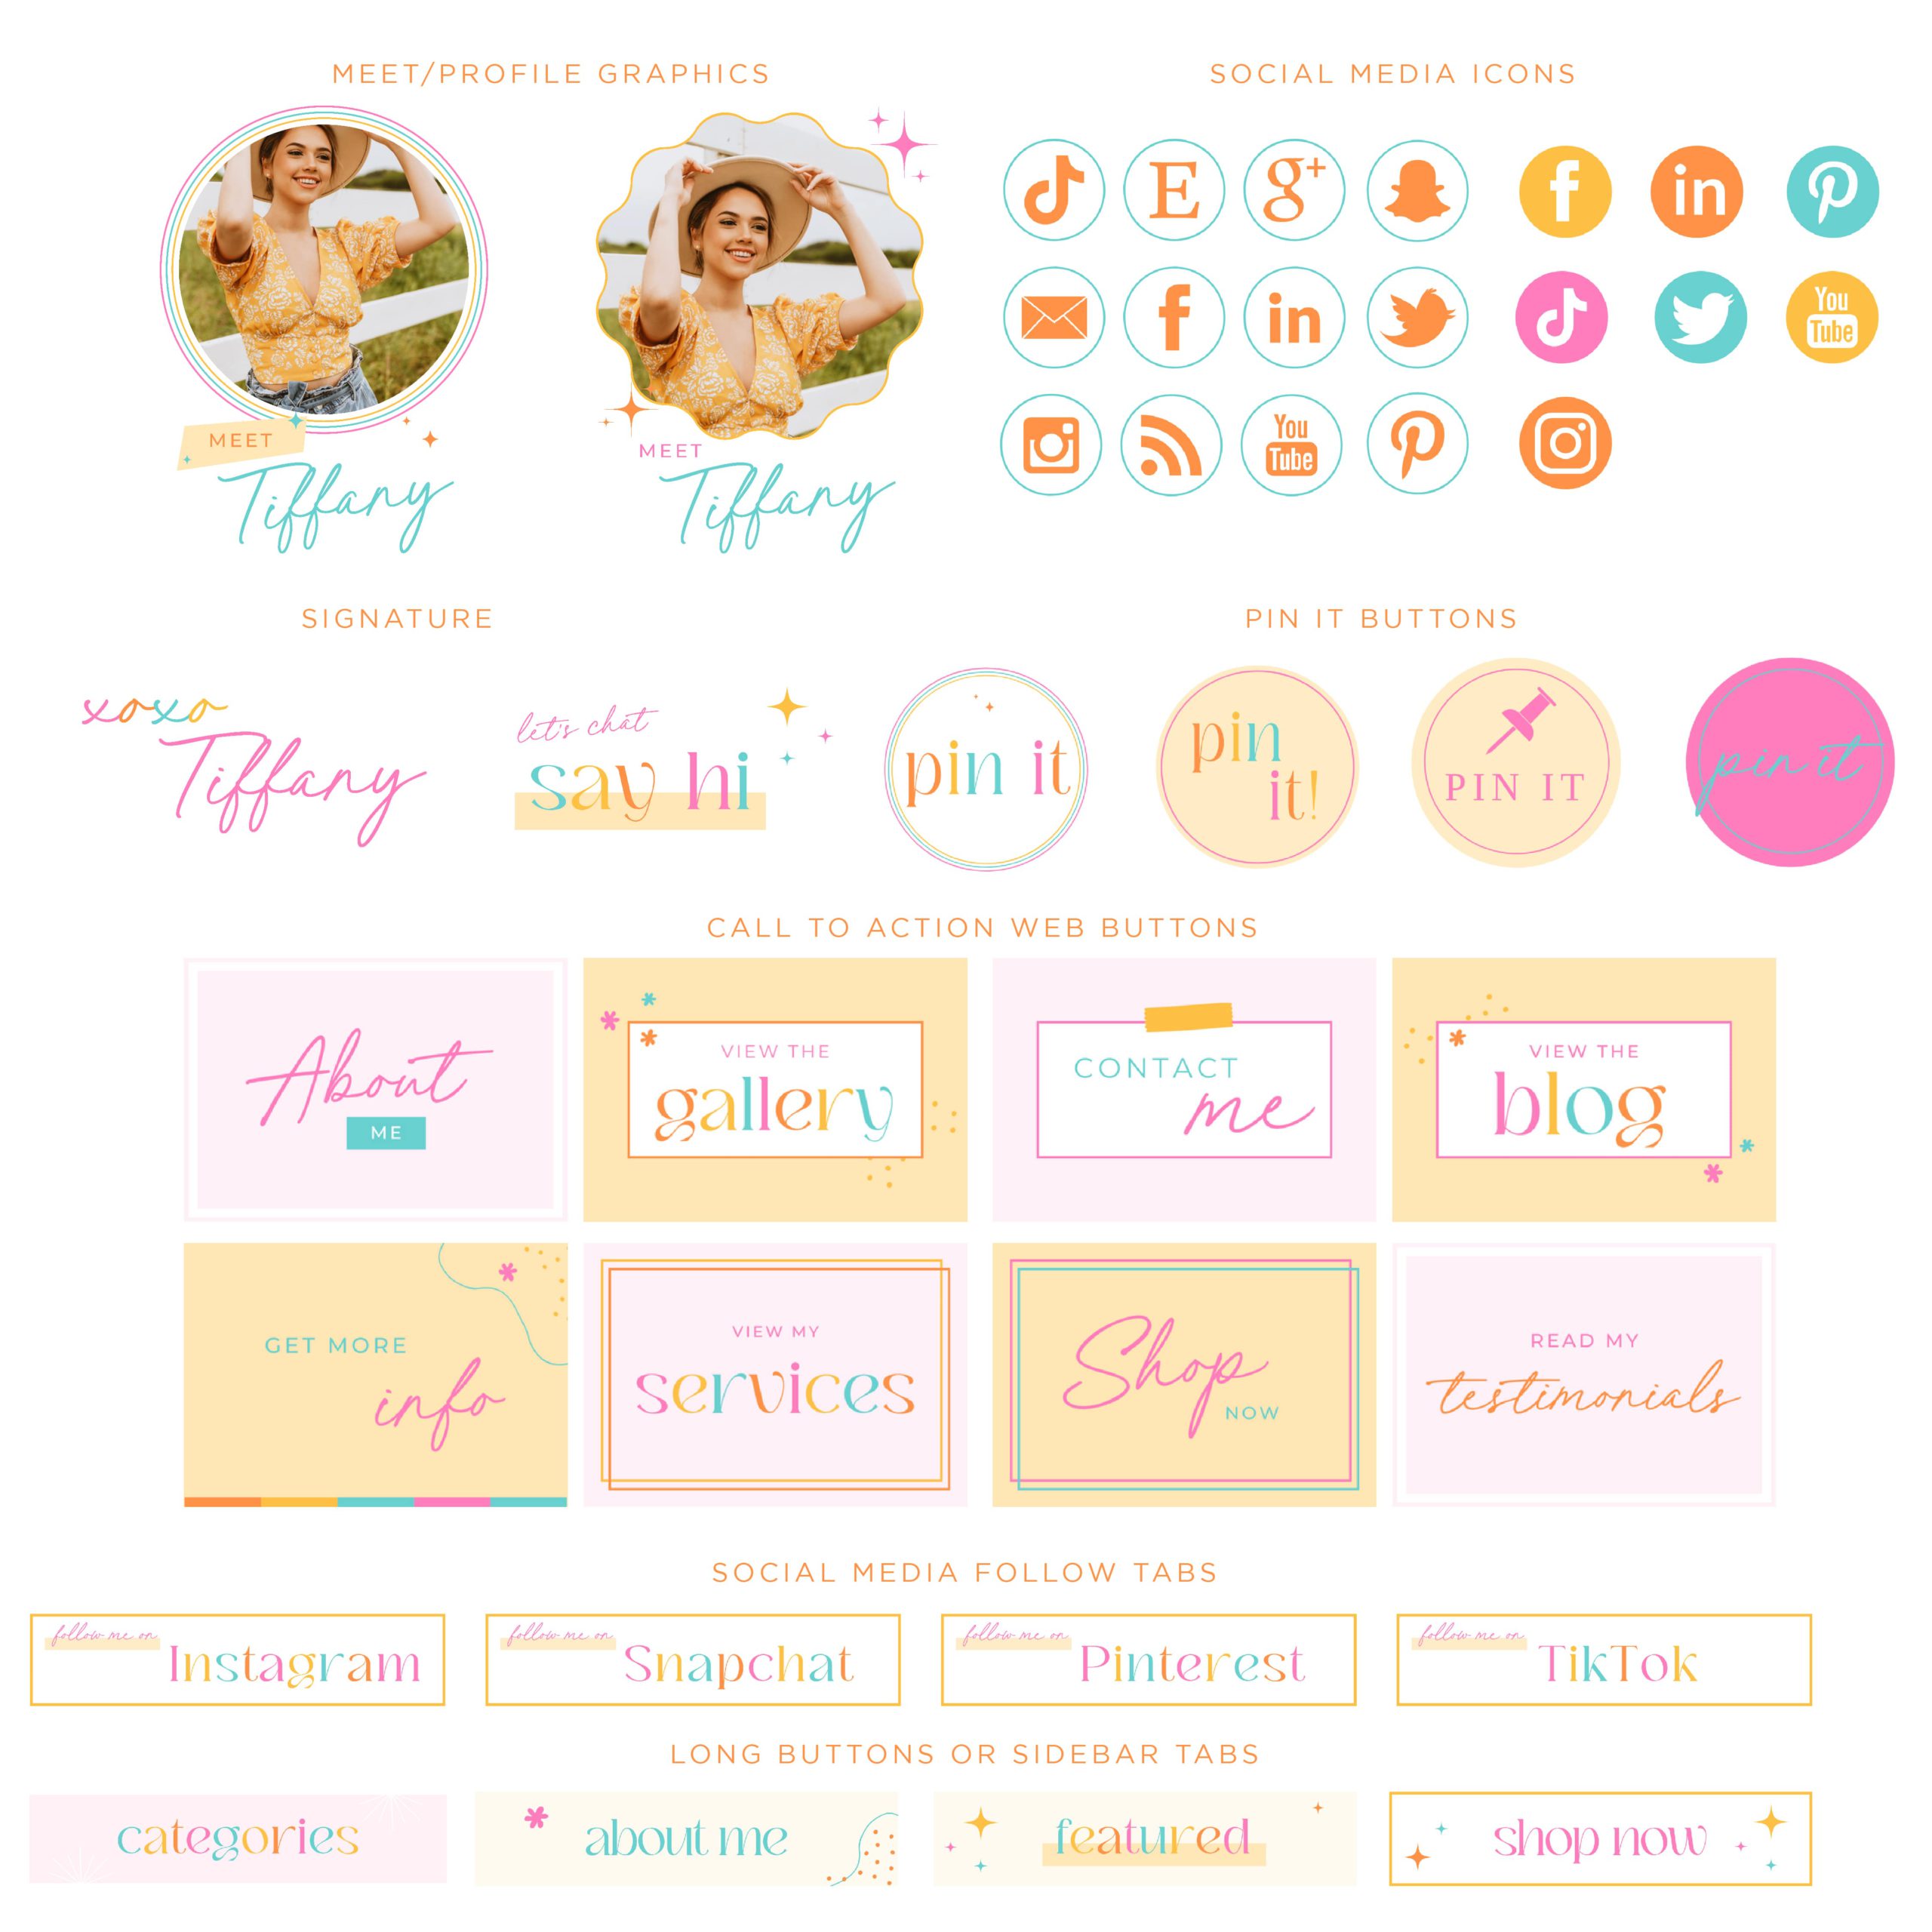 Bright Retro Ultimate Web Kit, Website Kit Template, Wordpress, Wix, Shopify also includes a blog and logo set. Colorful Boho Websites Buttons and Graphics